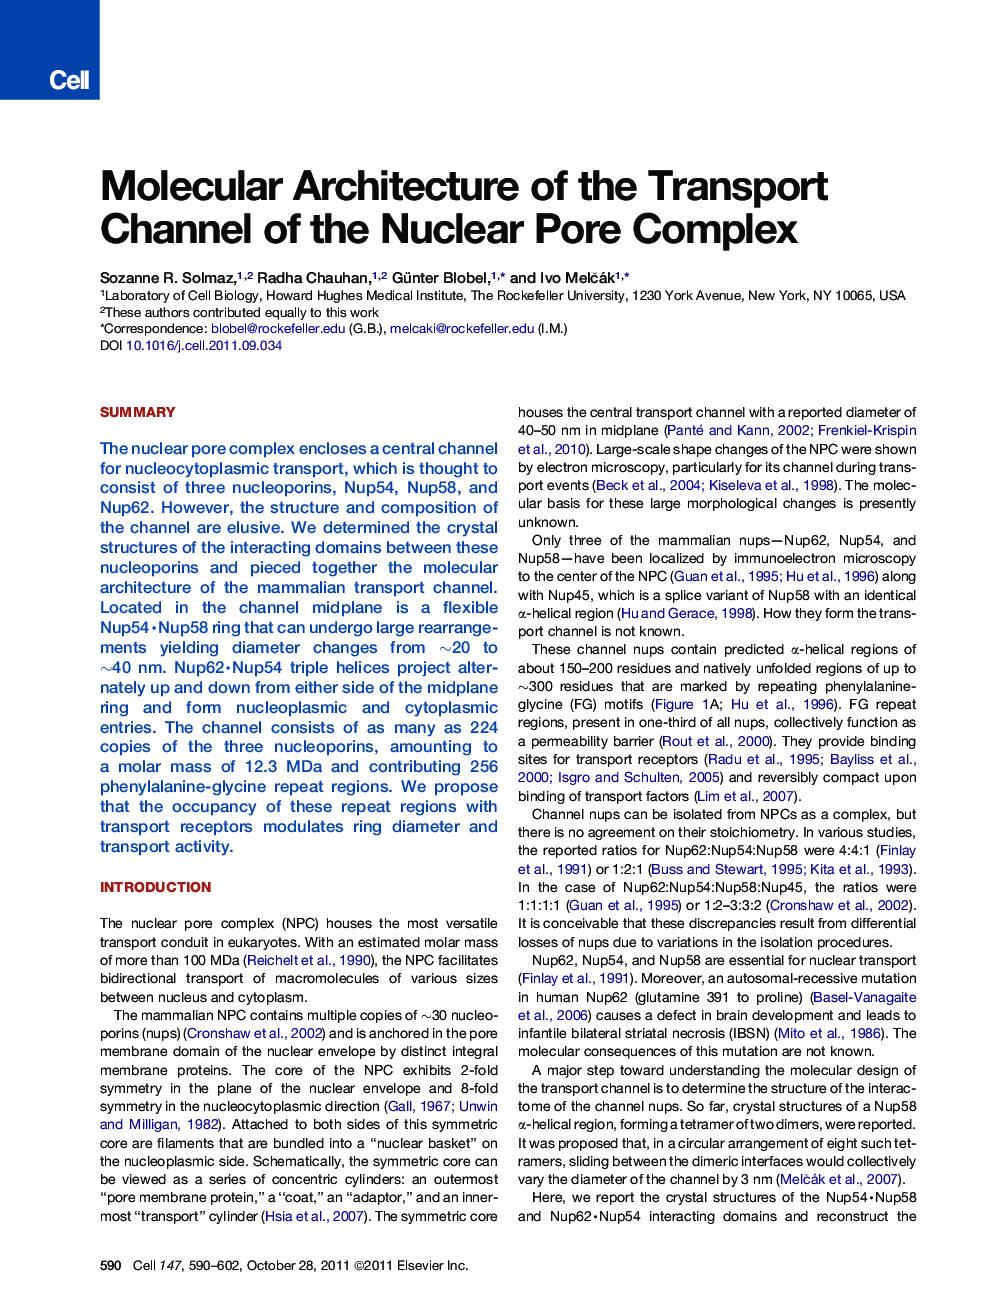 Molecular Architecture of the Transport Channel of the Nuclear Pore Complex